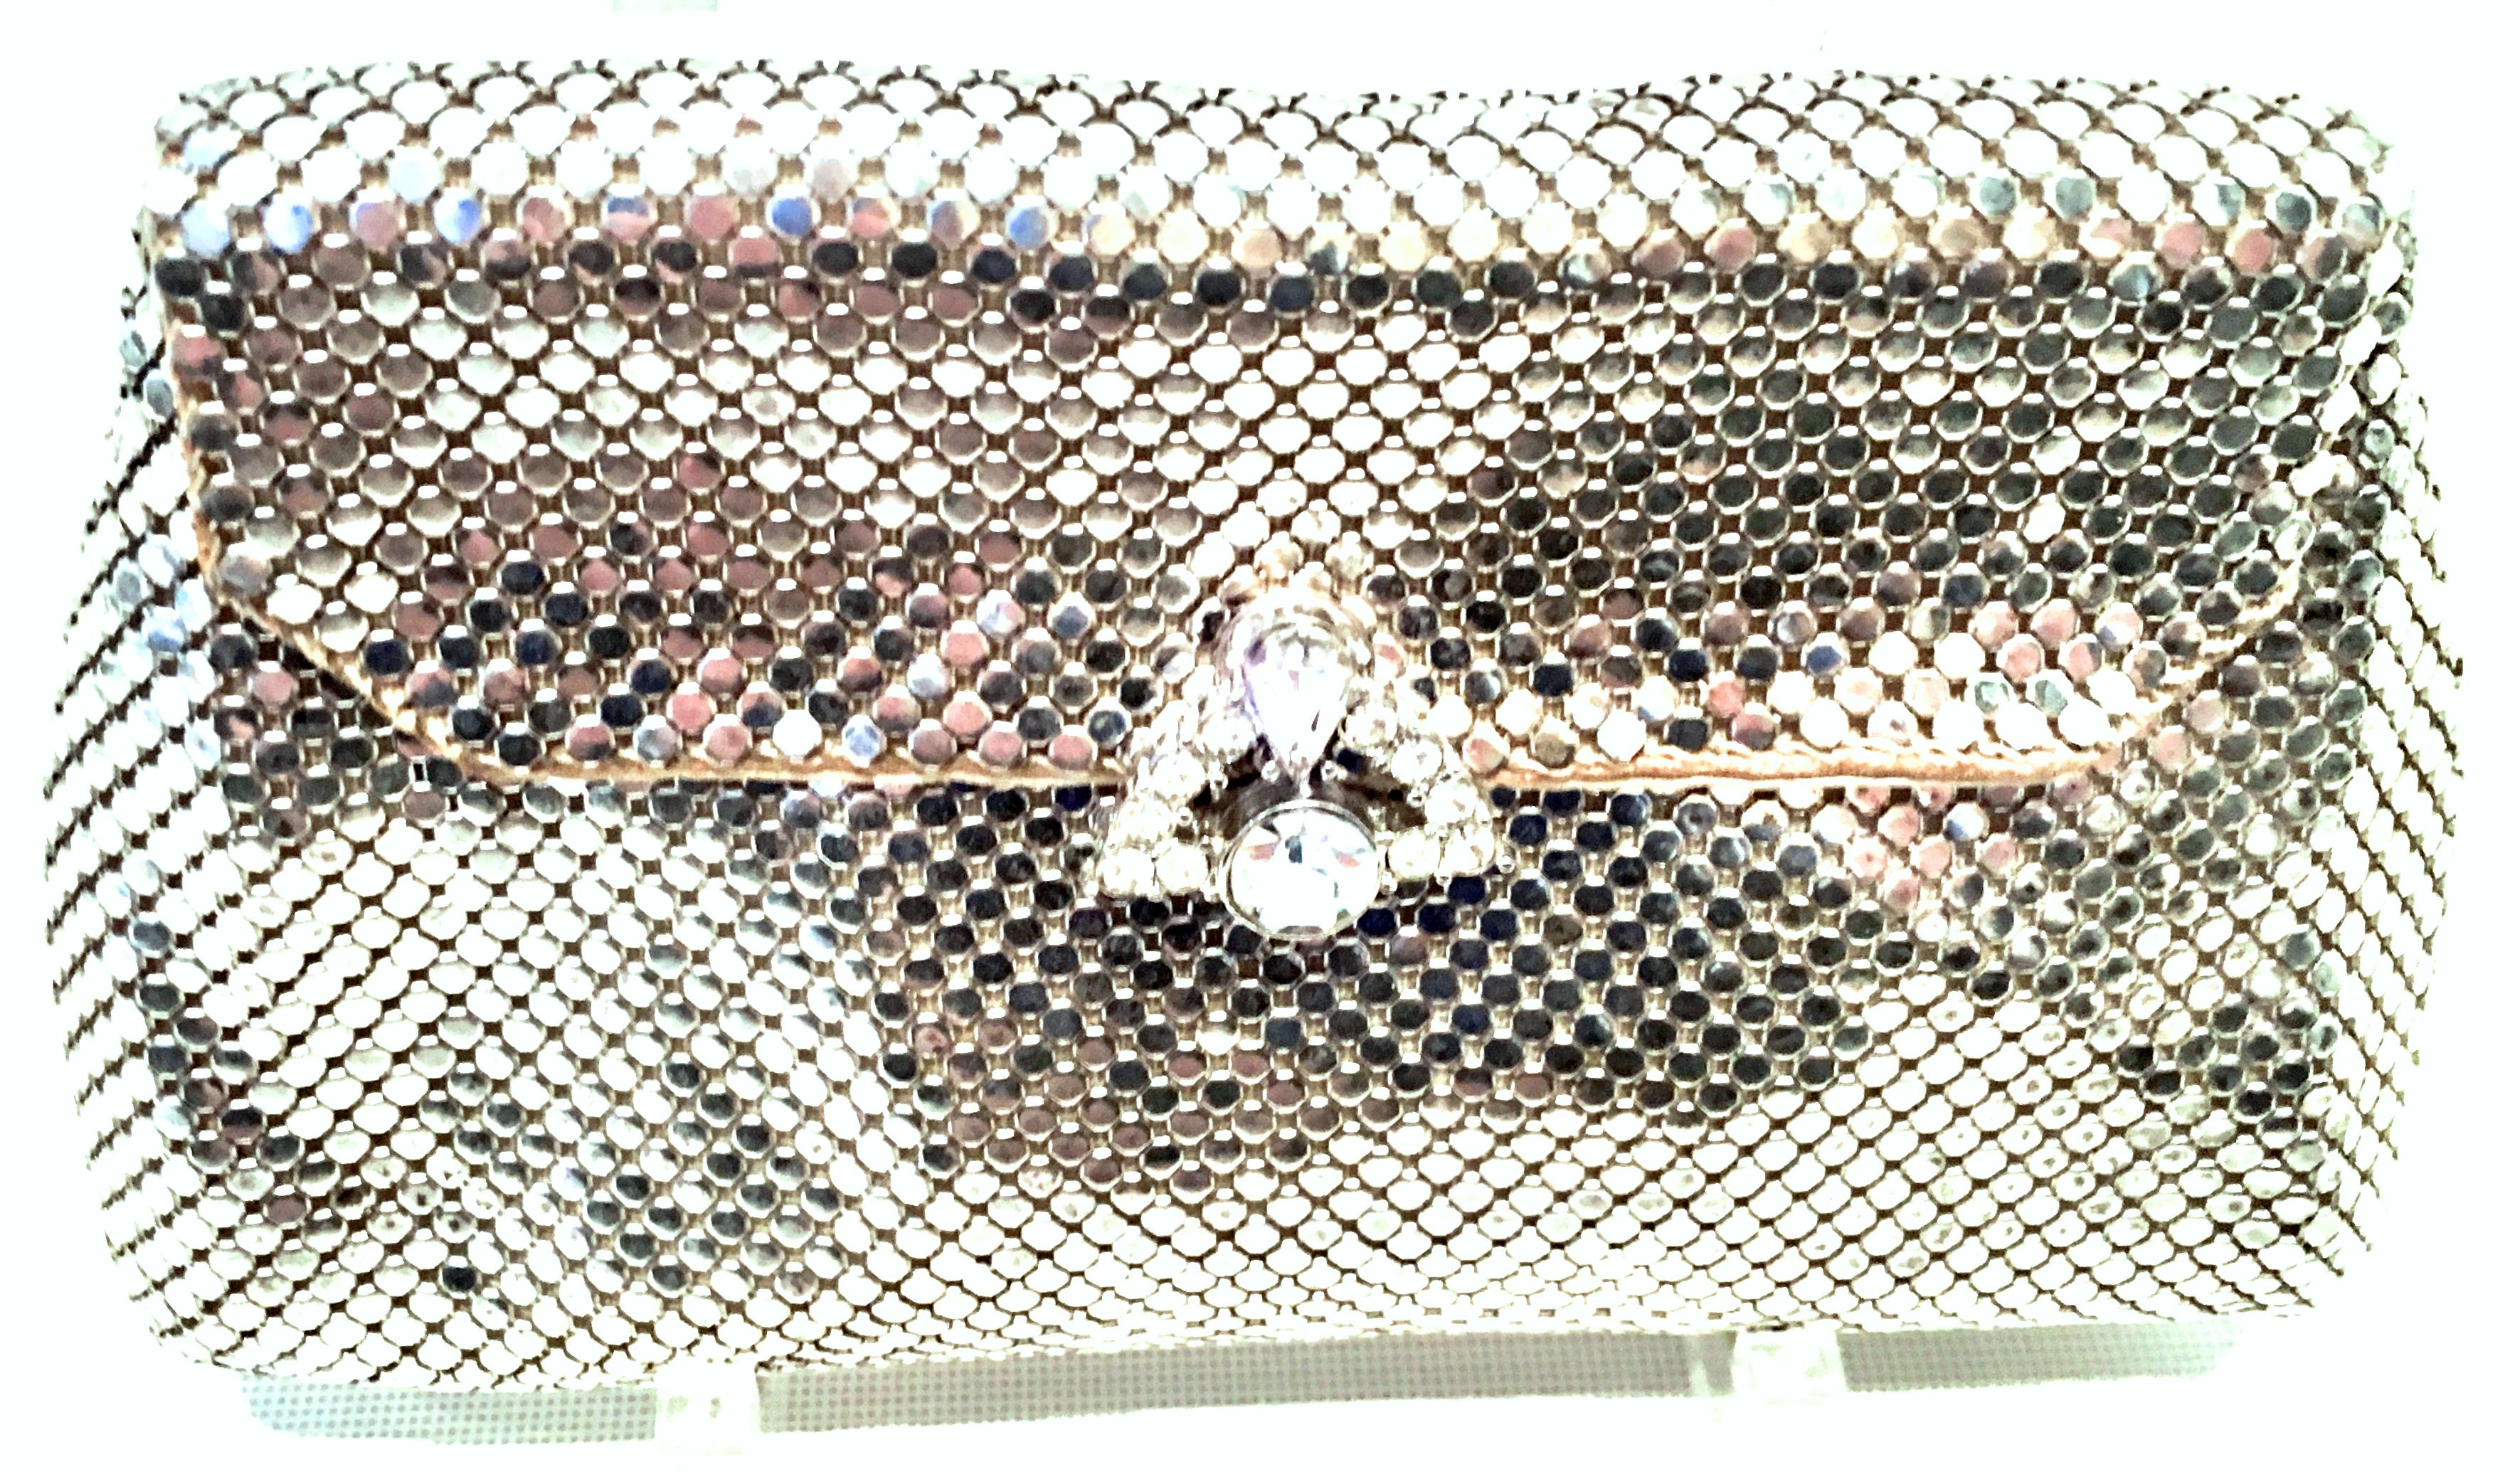 Mid-20th Century Art Deco Silver Metal Mesh & Austrian Crystal Evening Bag By, Whiting & Davis. This finely crafted and coveted piece features a silver and prong set colorless Austrian crystal ornament snap closure. The original Whiting & Davis